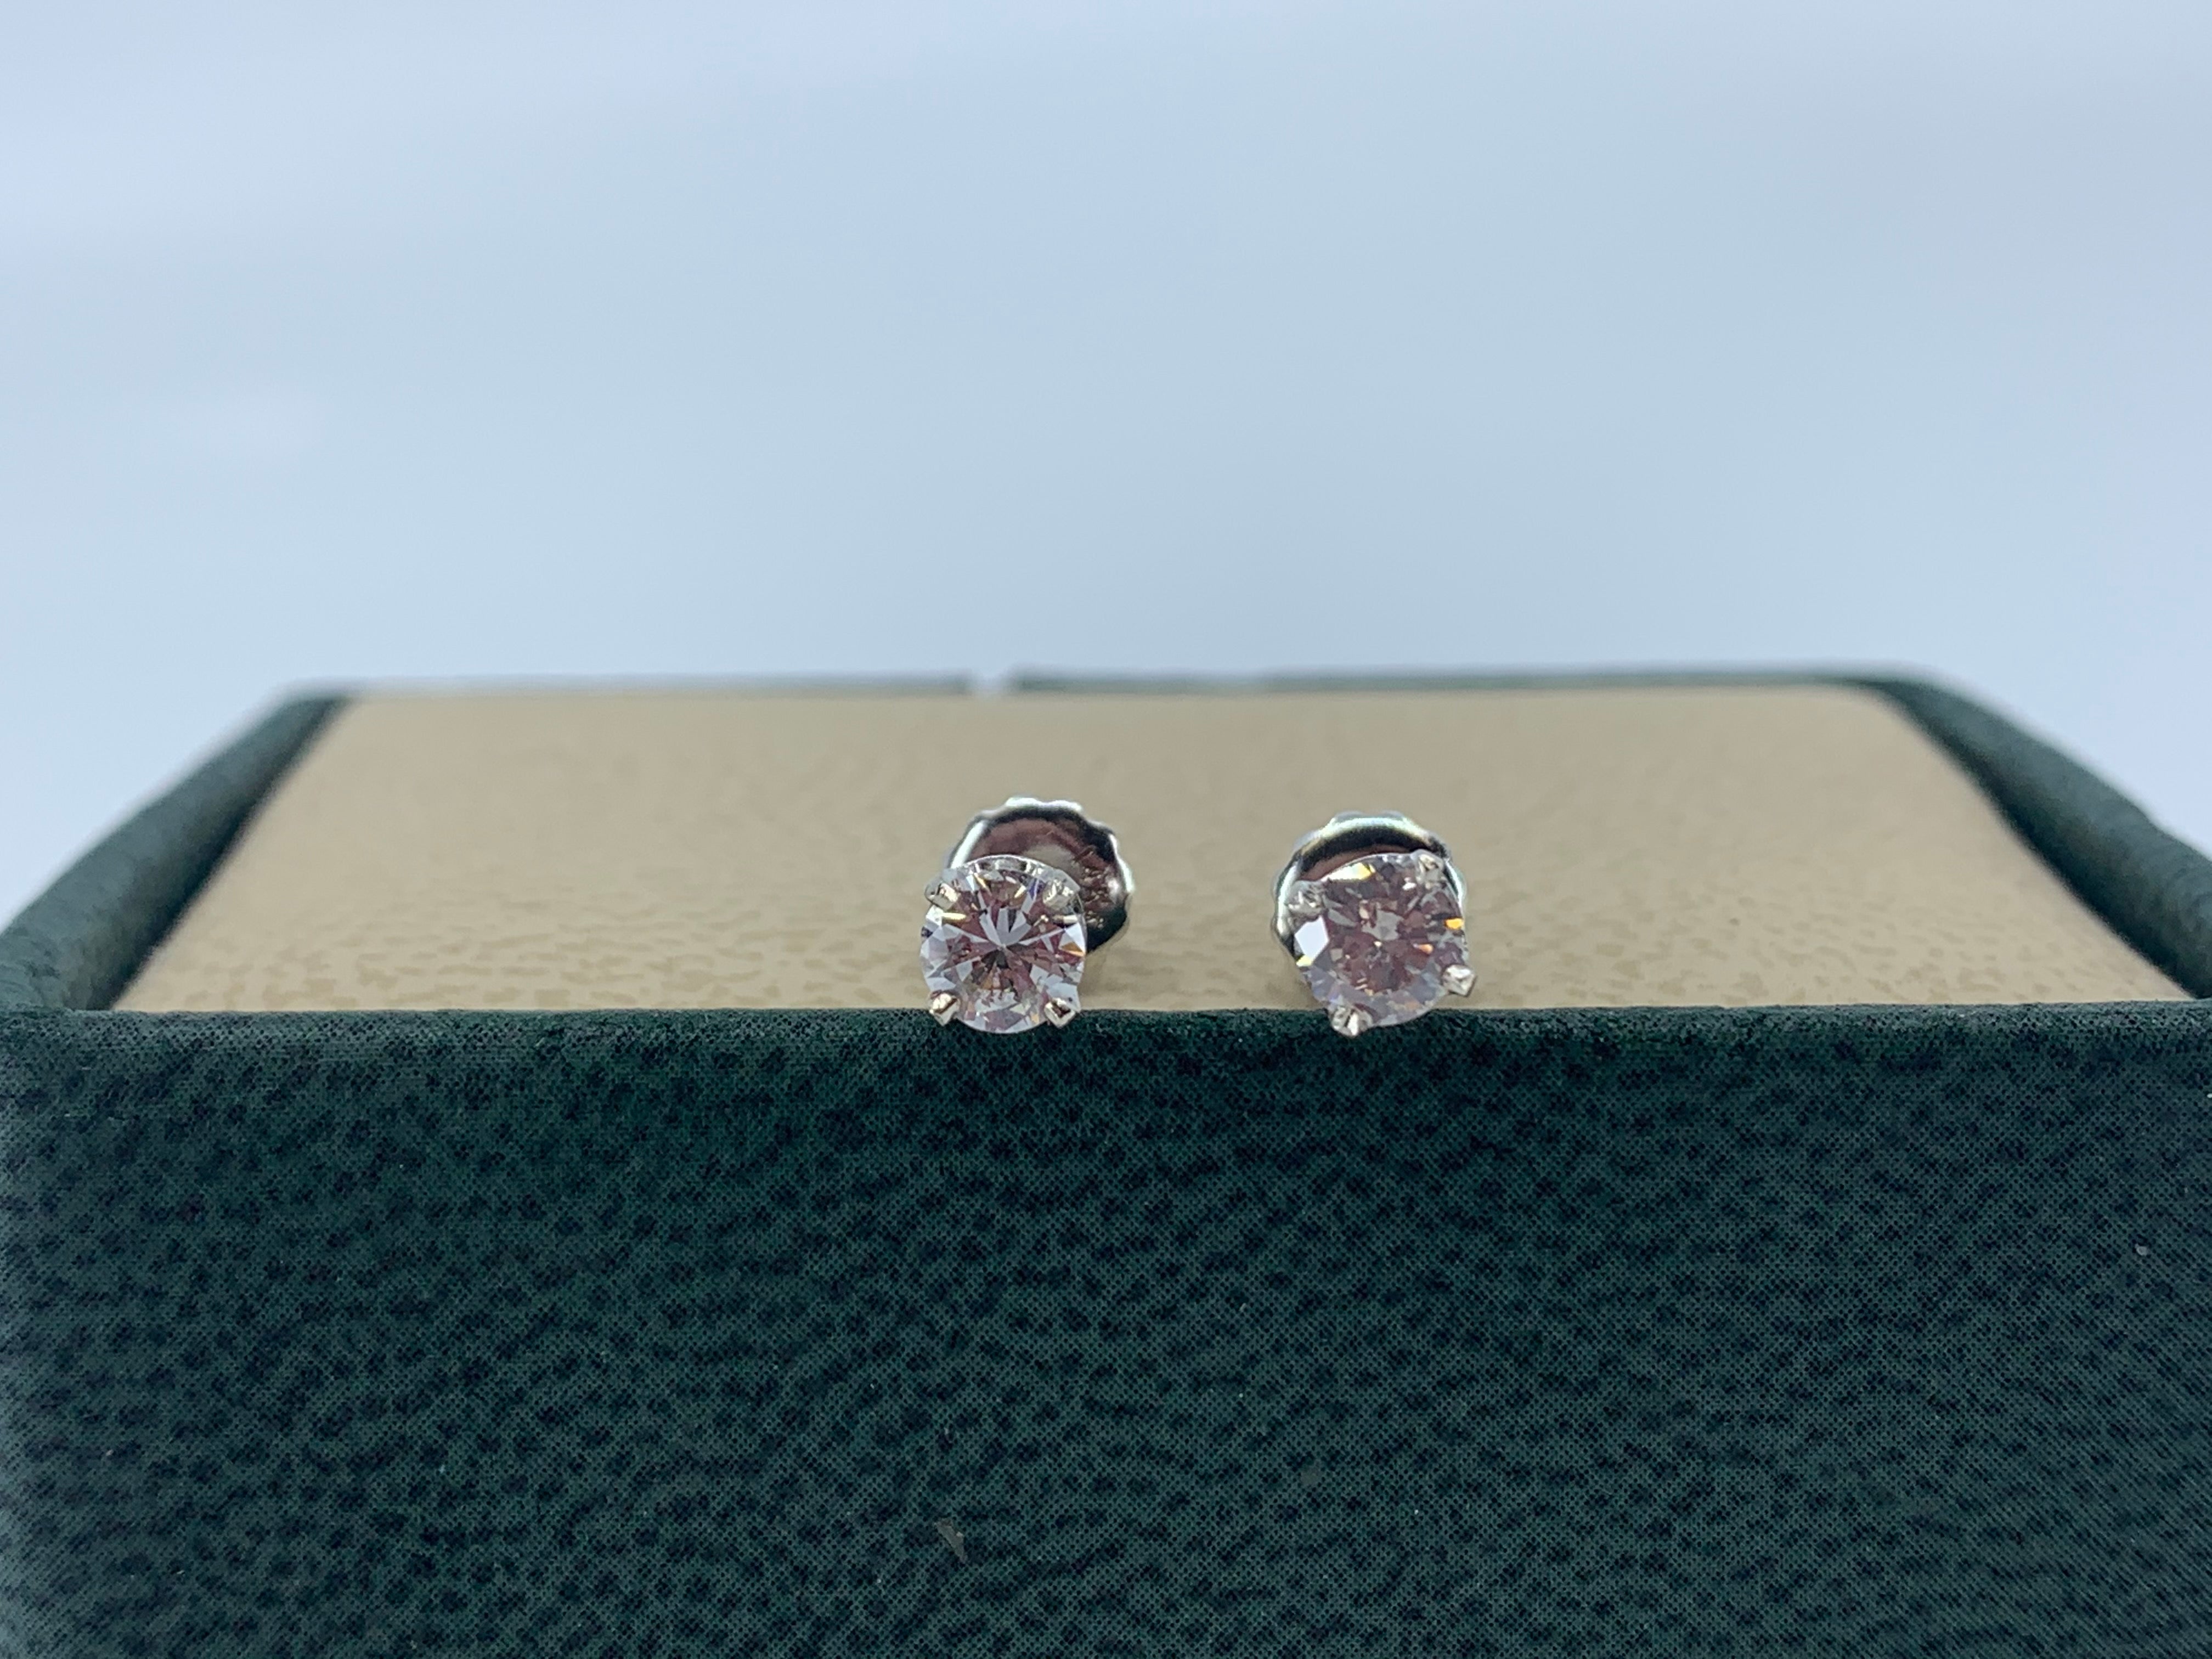 14K White Gold Diamond Studs .56 Carat Total Weight with Screw Back Post